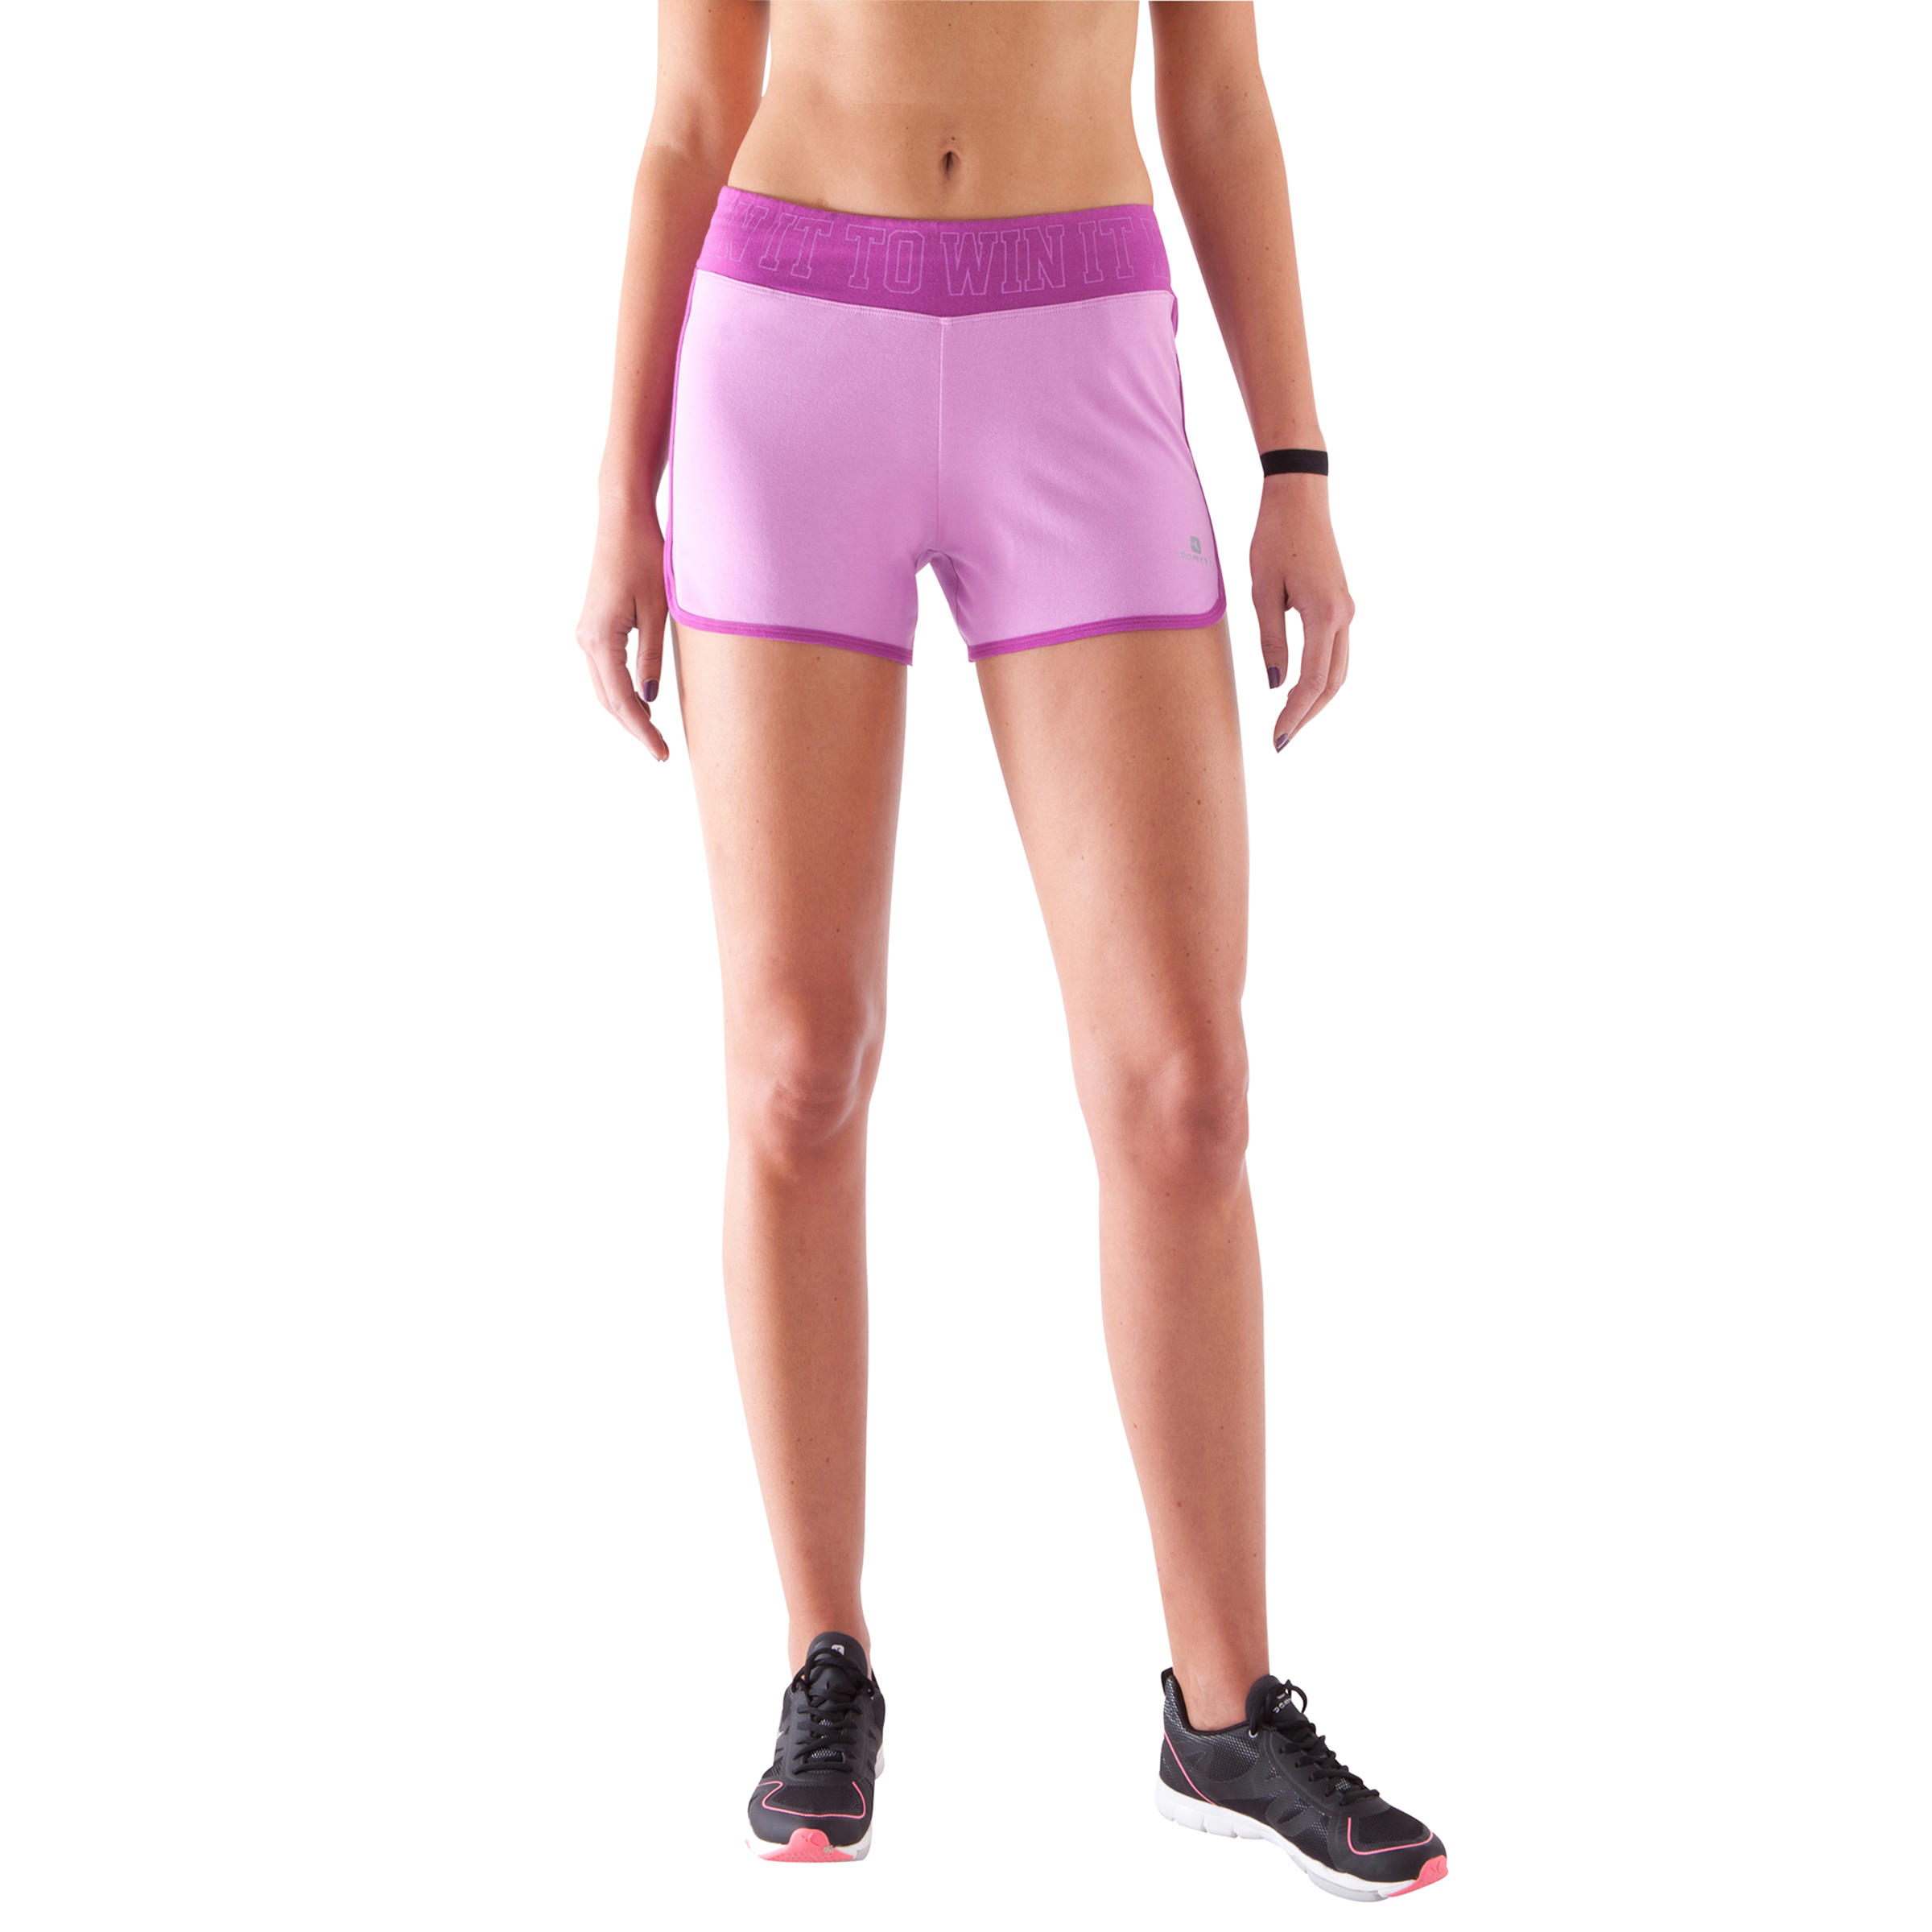 Women's Fitness Shorts with Contrasting Print Waistband - Mauve/Dark Pink 3/11